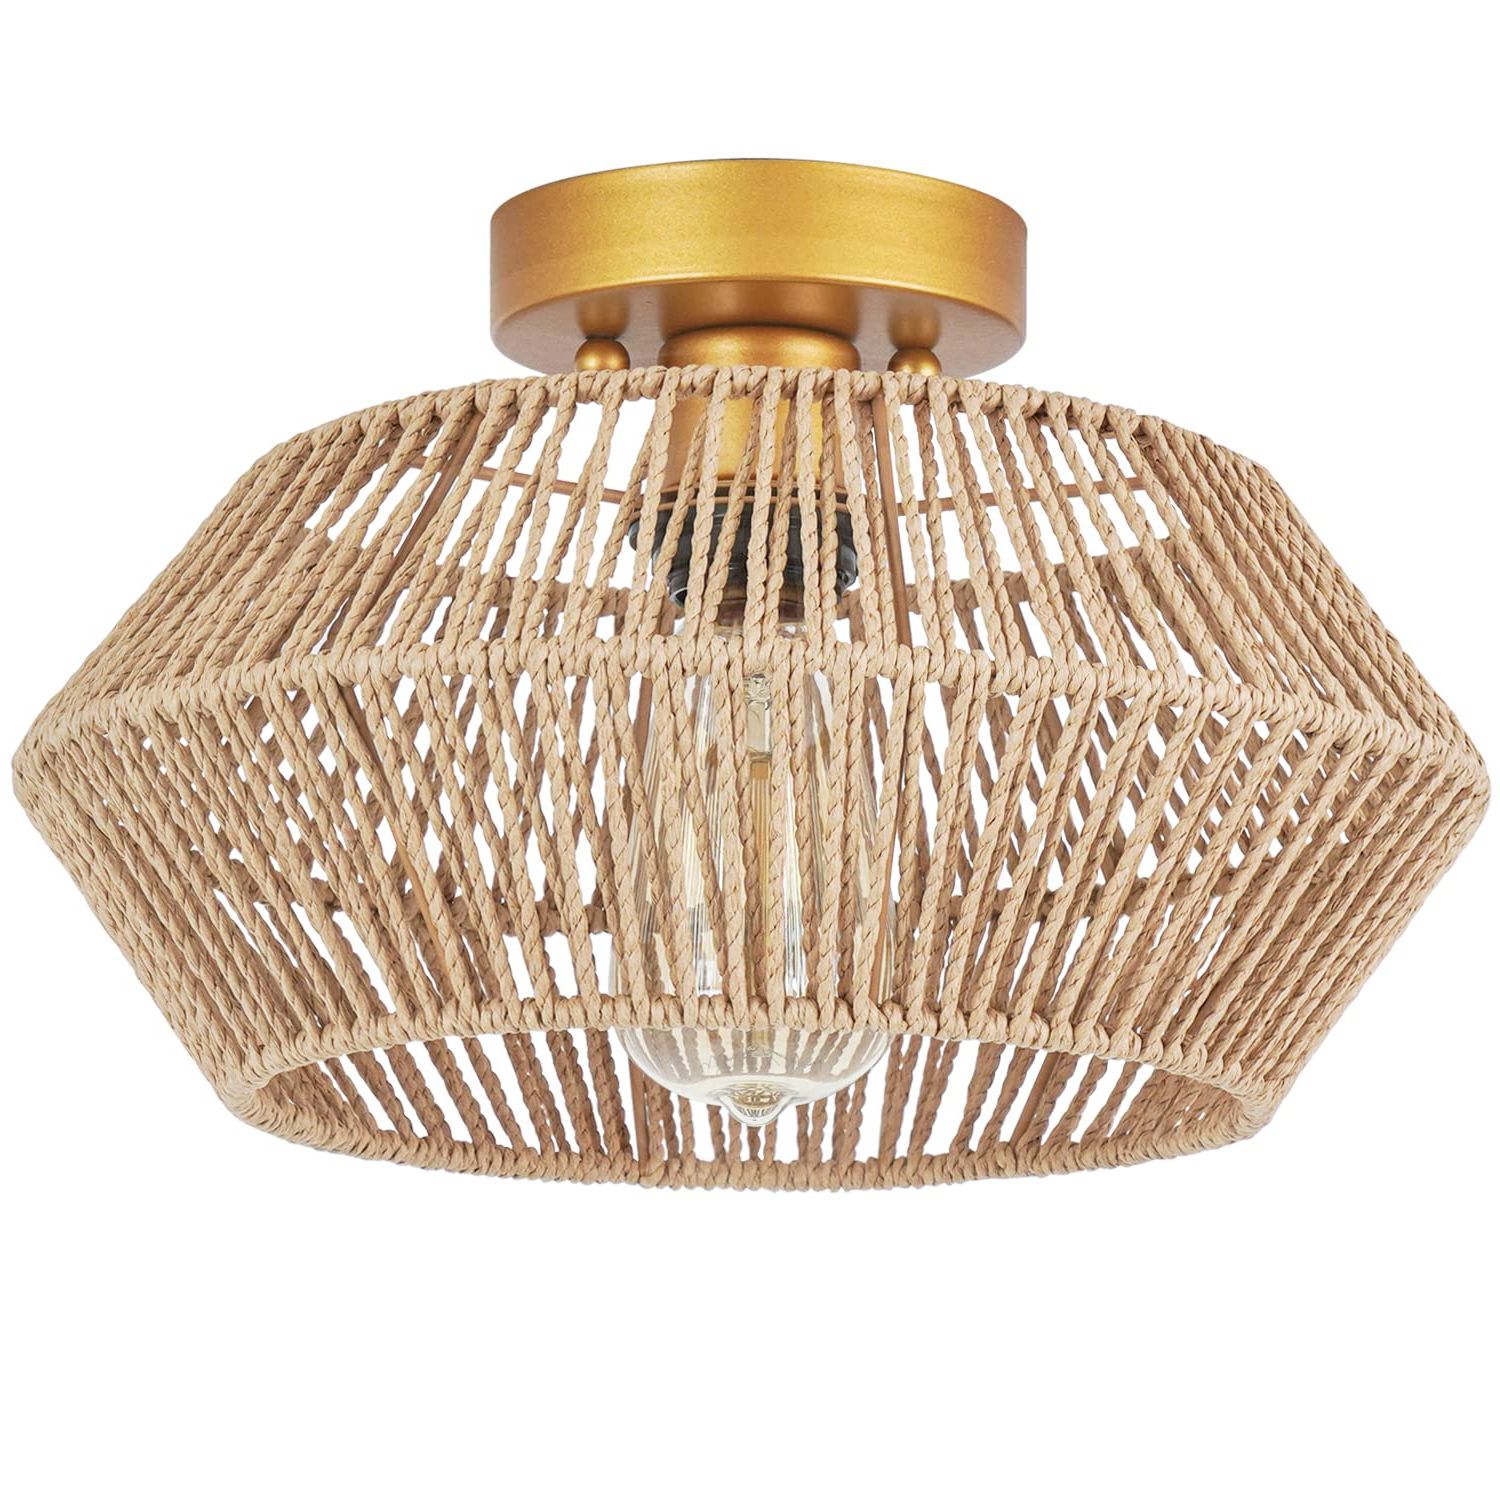 Favorite Viluxy Woven Rattan Light Fixtures Ceiling Mount, Hand Worked Cage Shade  Natural Mini Chandelier Antique Brass Brush Paint Finish For Bedroom,  Corridor, Hallway, Entryway, Study Room – – Amazon Within Natural Brass Foyer Lantern Chandeliers (View 13 of 15)